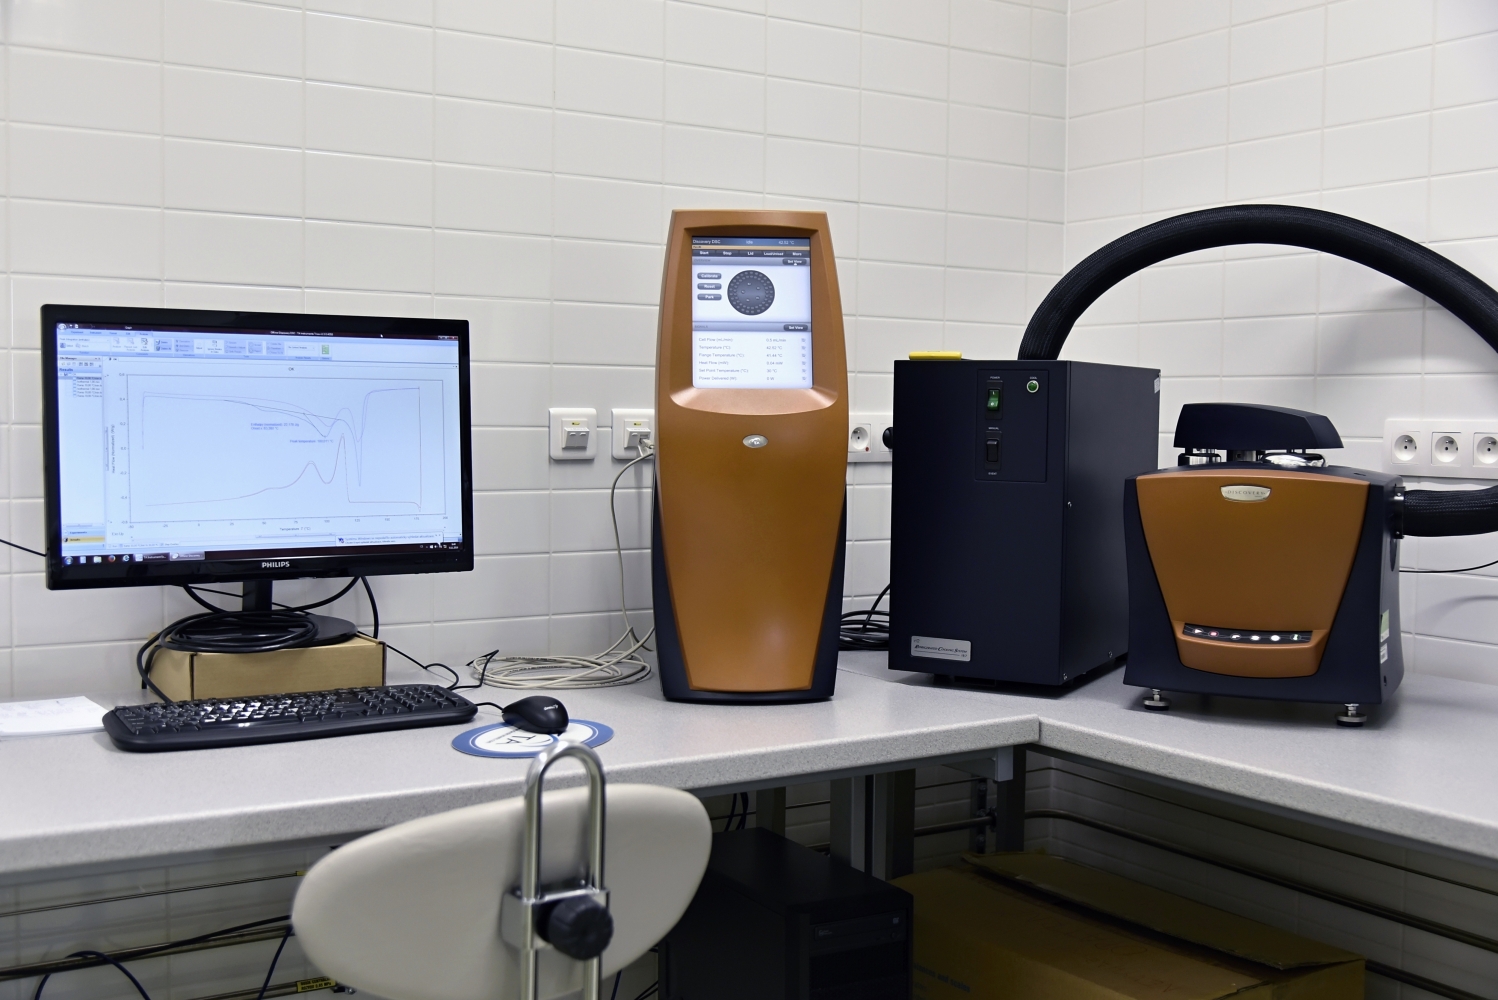 Modulated differential scanning calorimeter (DSC) TA Instruments Discovery equipped with a photo-calorimetric module OmniCure Series 2000 Lumen Dynamics VUT CEITEC